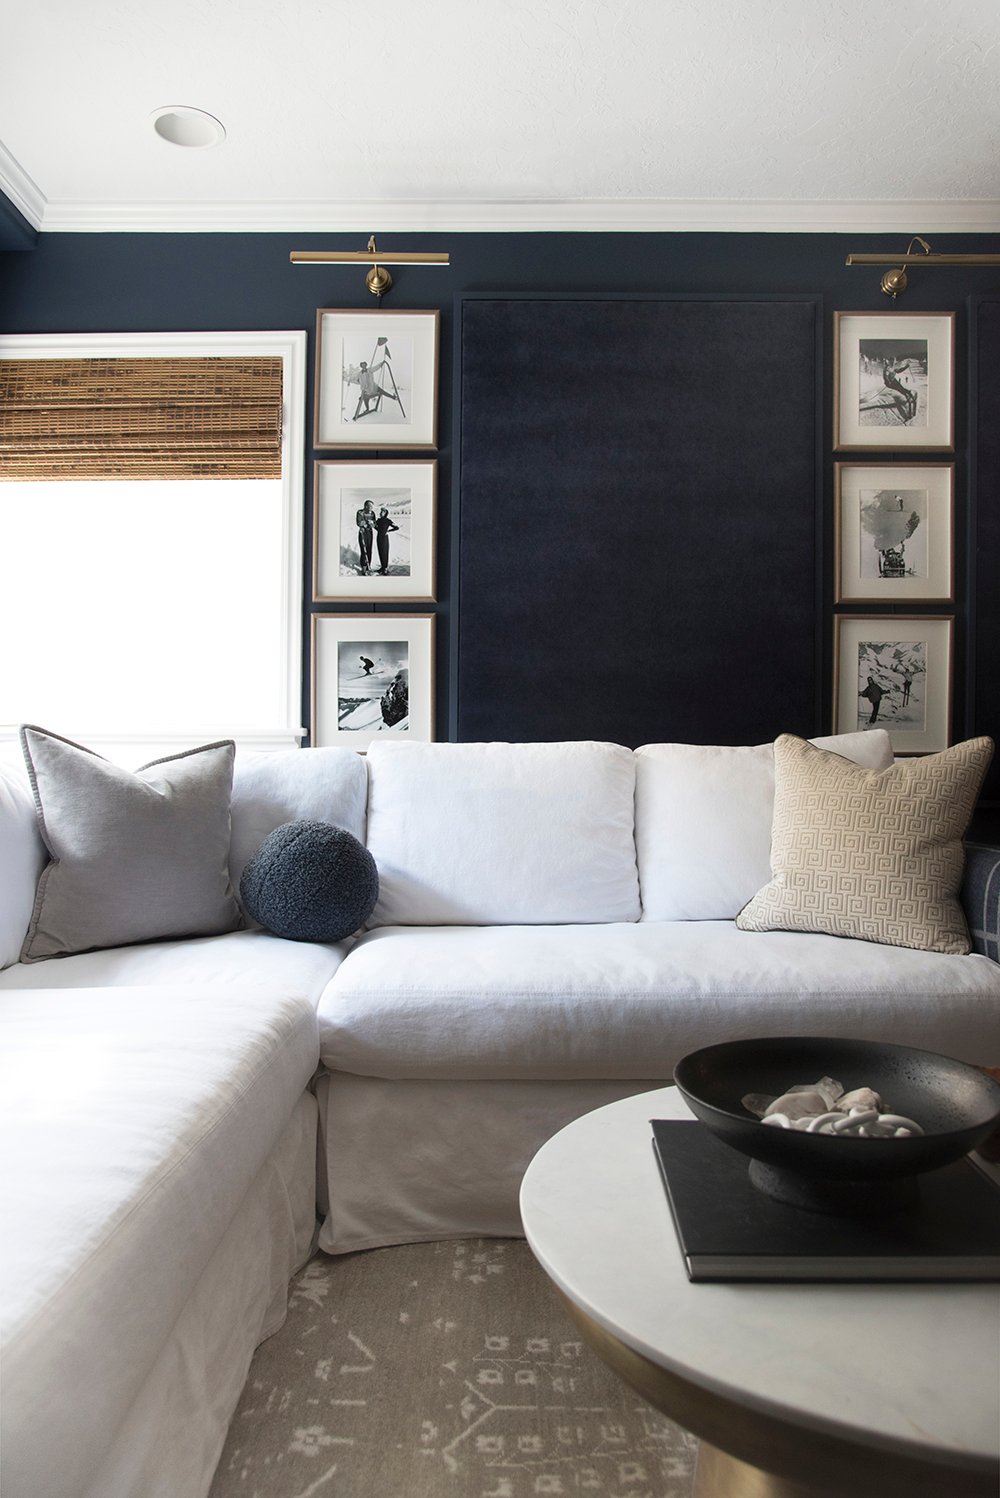 Timeless vs. Trendy: Choosing the Best Finishes & Furnishings for Your Home - roomfortuesday.com